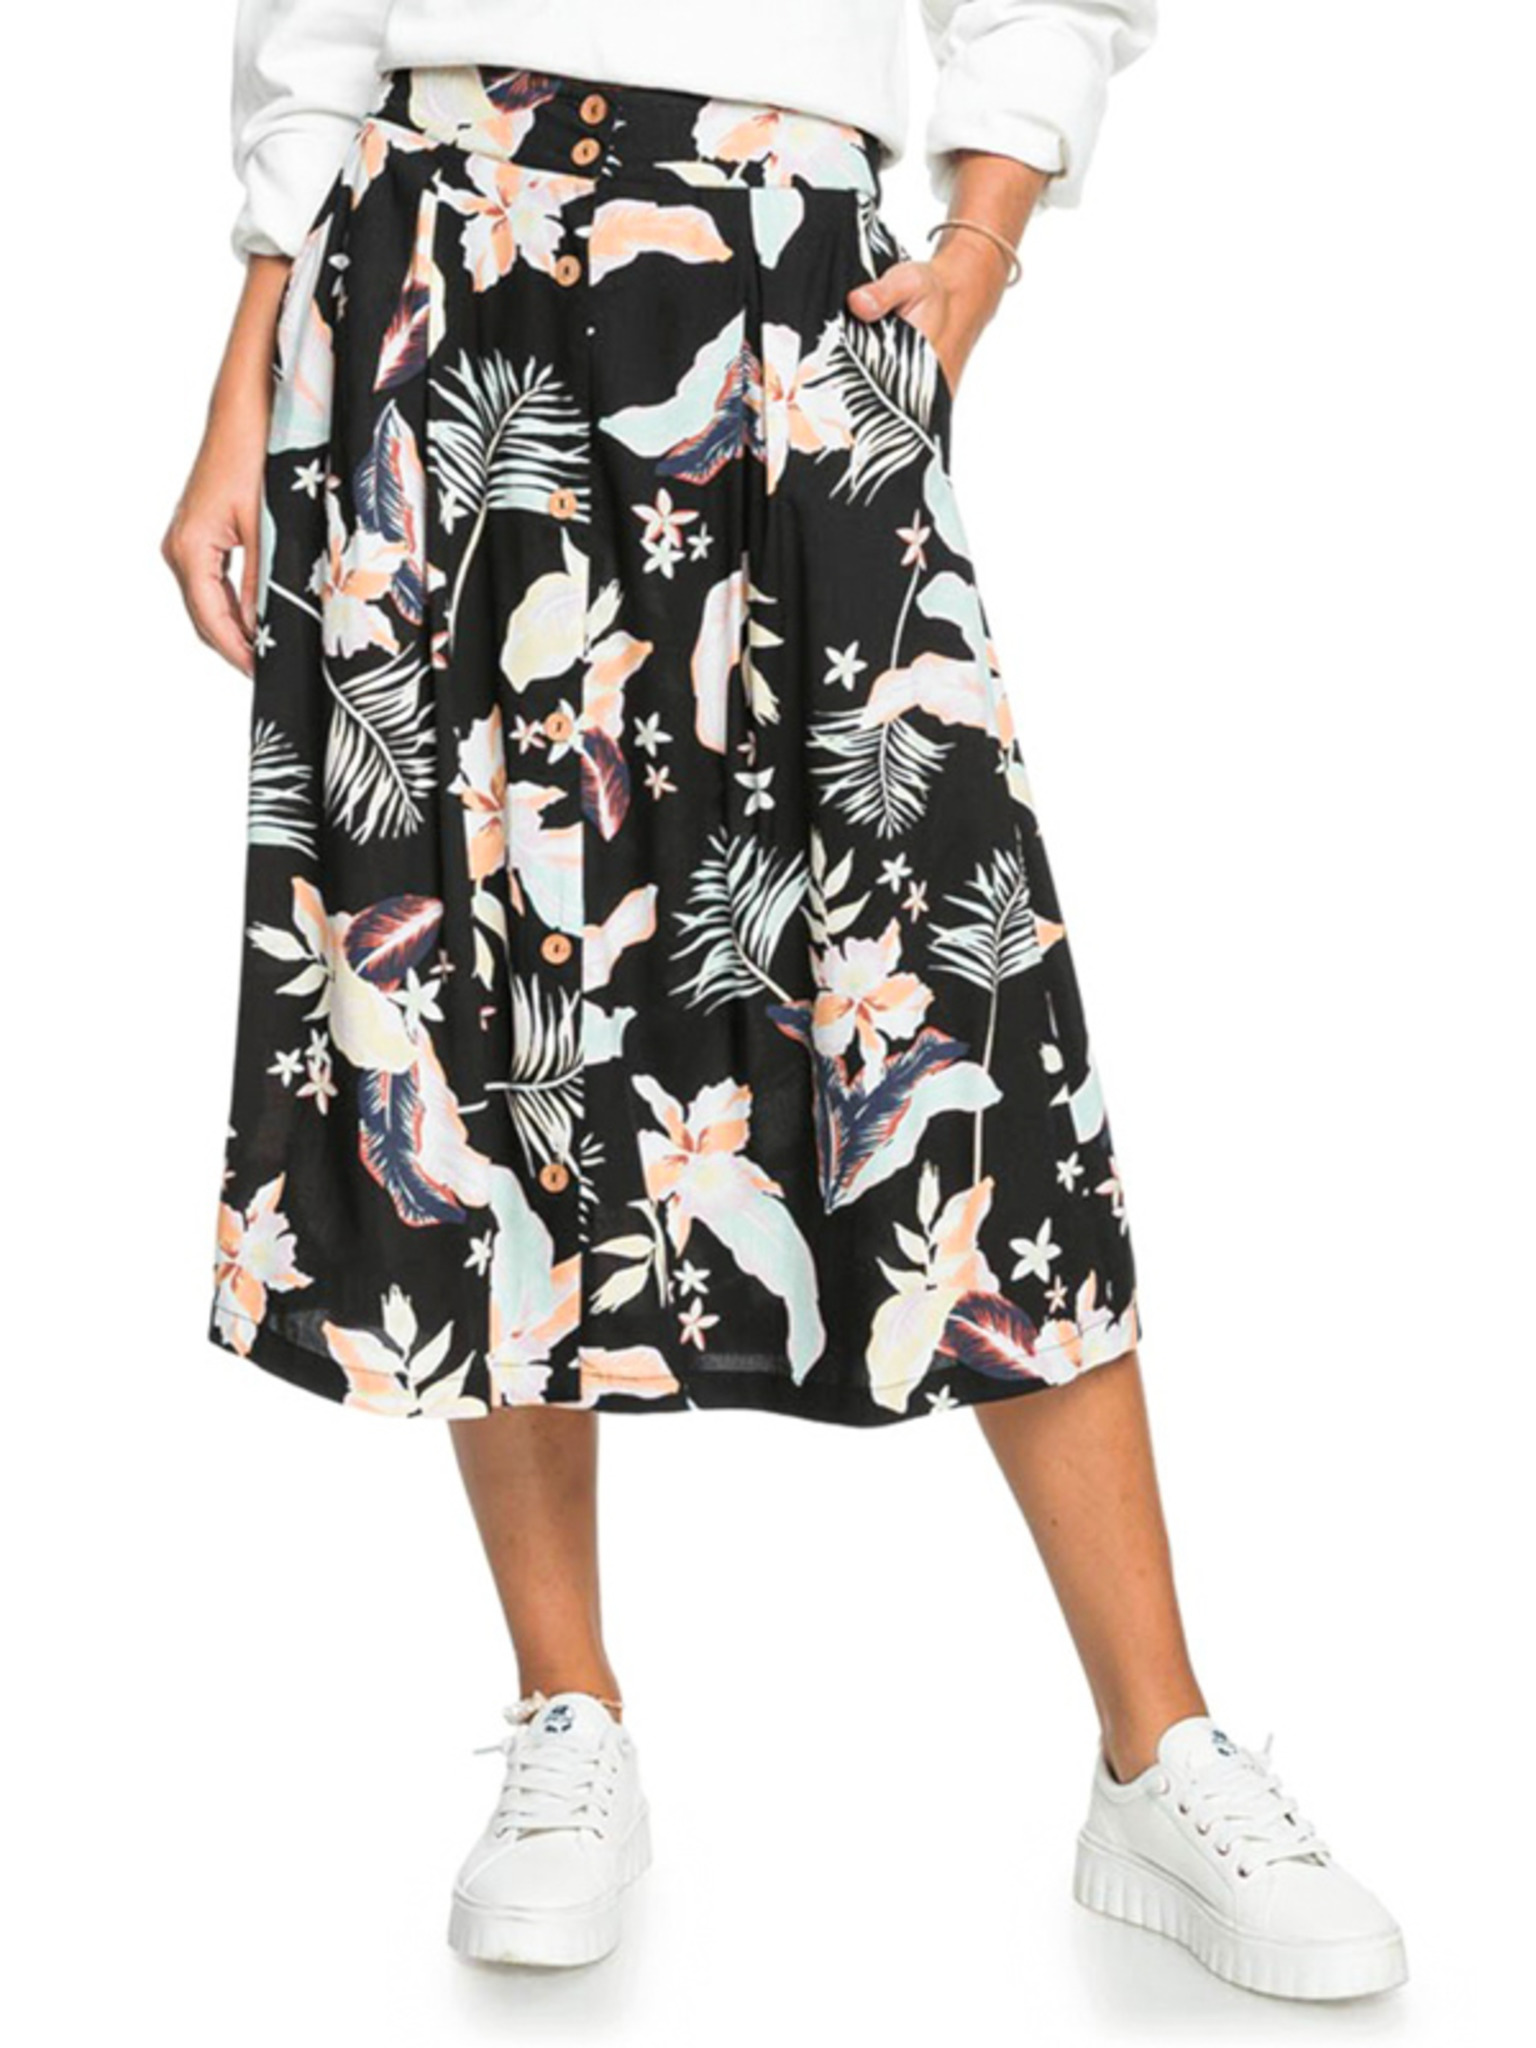 Buy Roxy Juniors Indy Orchid Skirt, Black, Large at Amazon.in